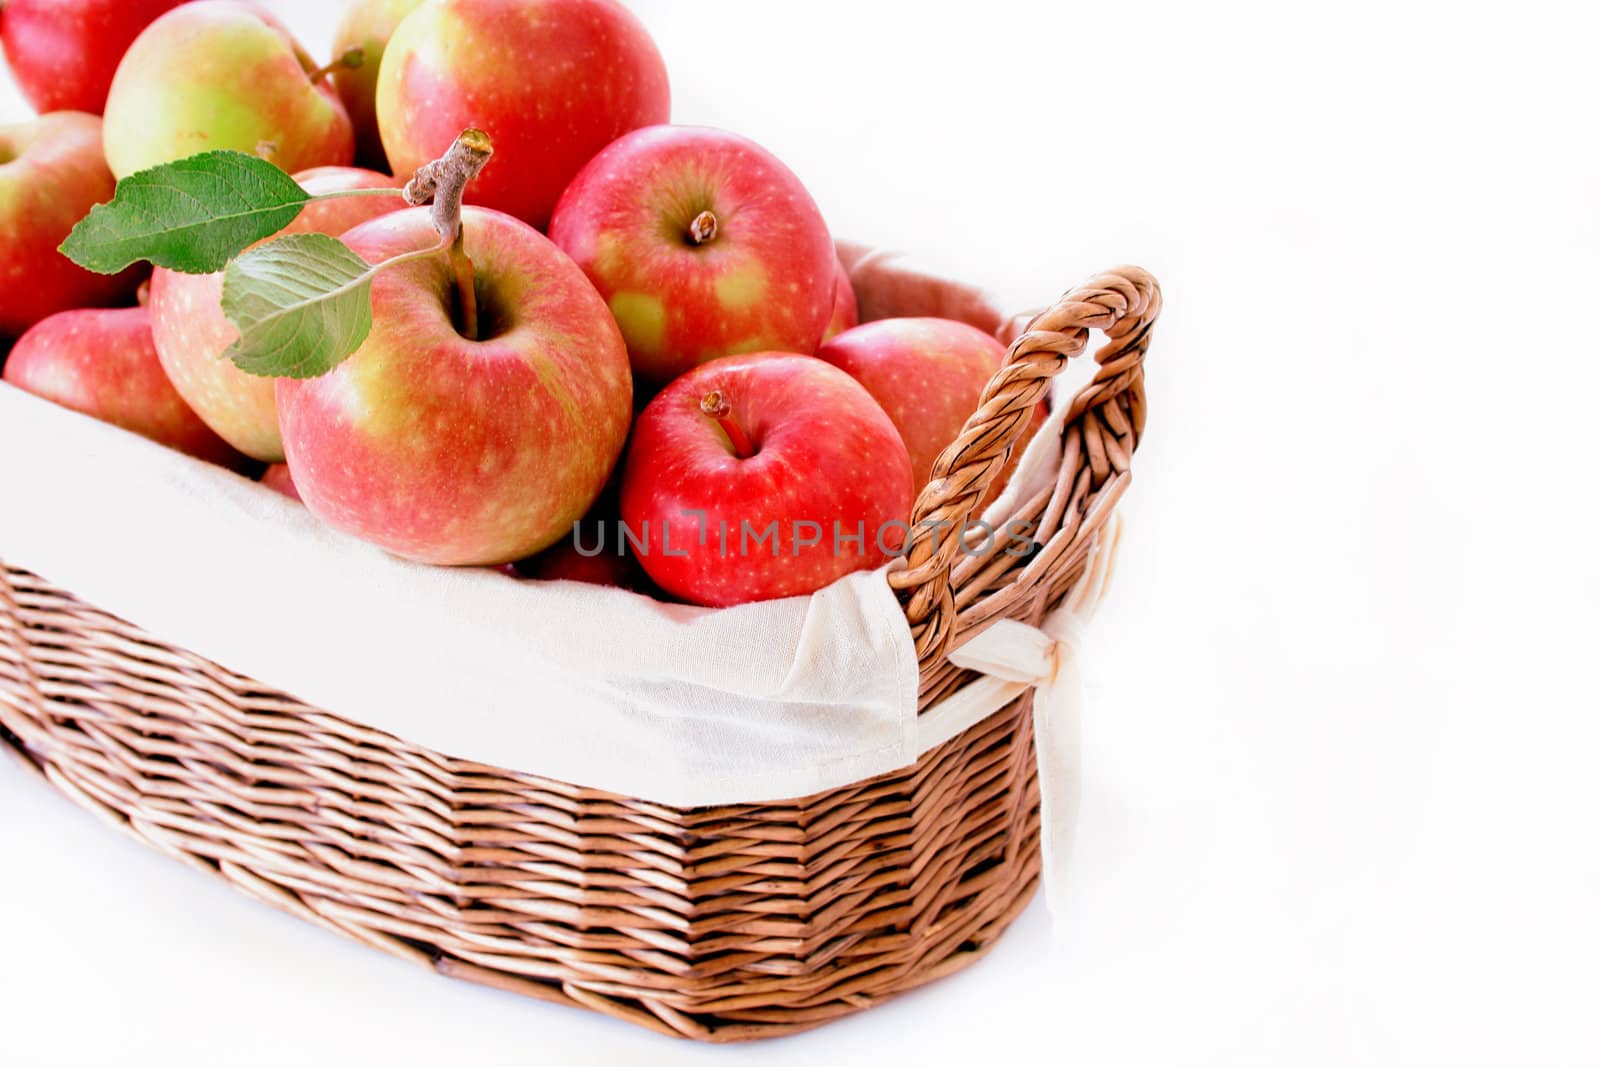 A basket of fresh picked apples isolated on white.